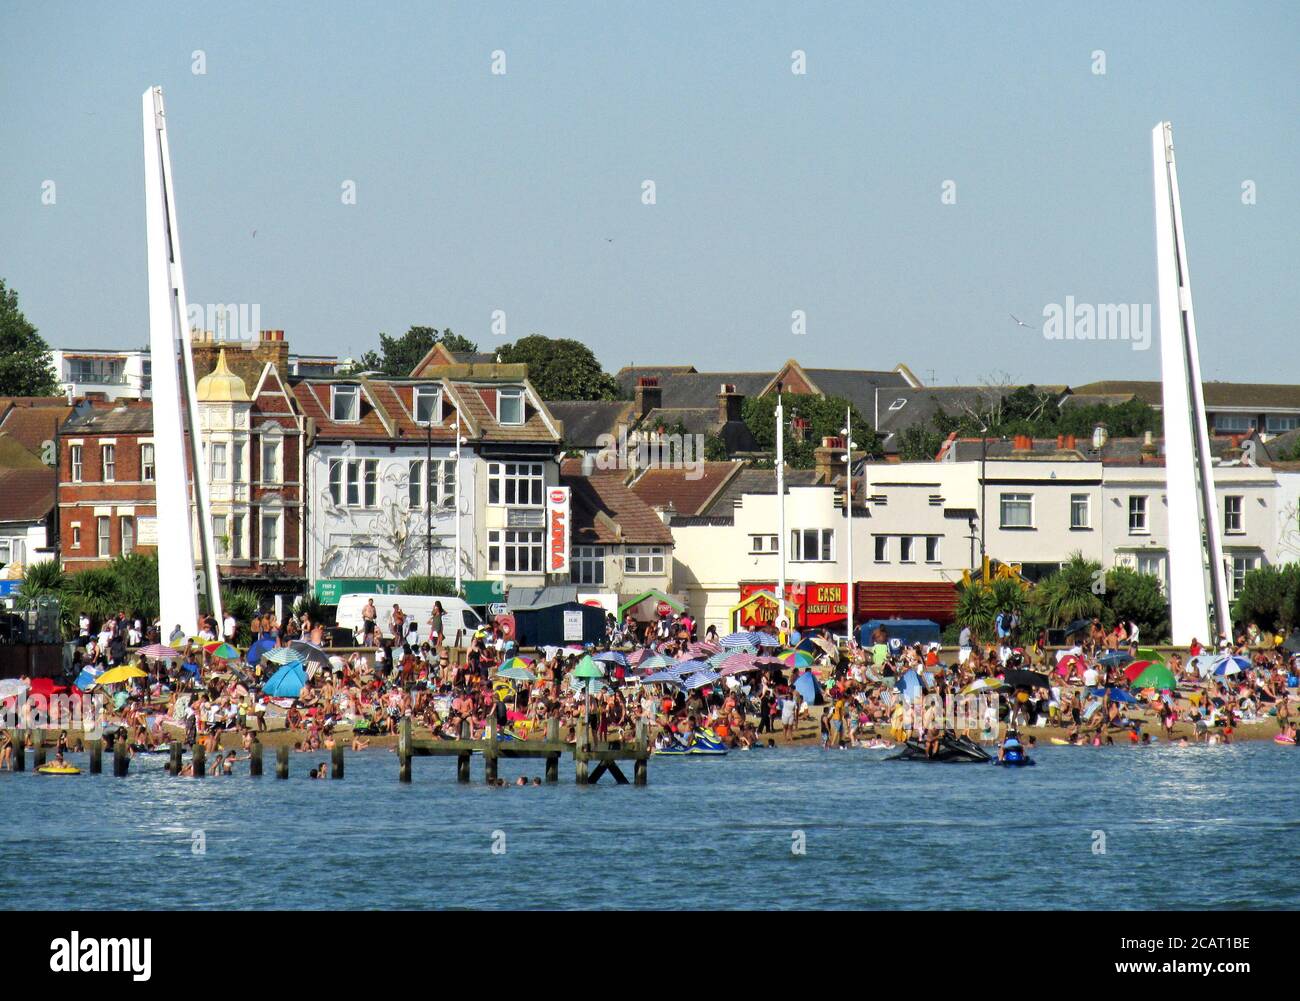 Southend seafront and Pier August 2020 heatwave record temperatures and visitors pack the beaches Stock Photo